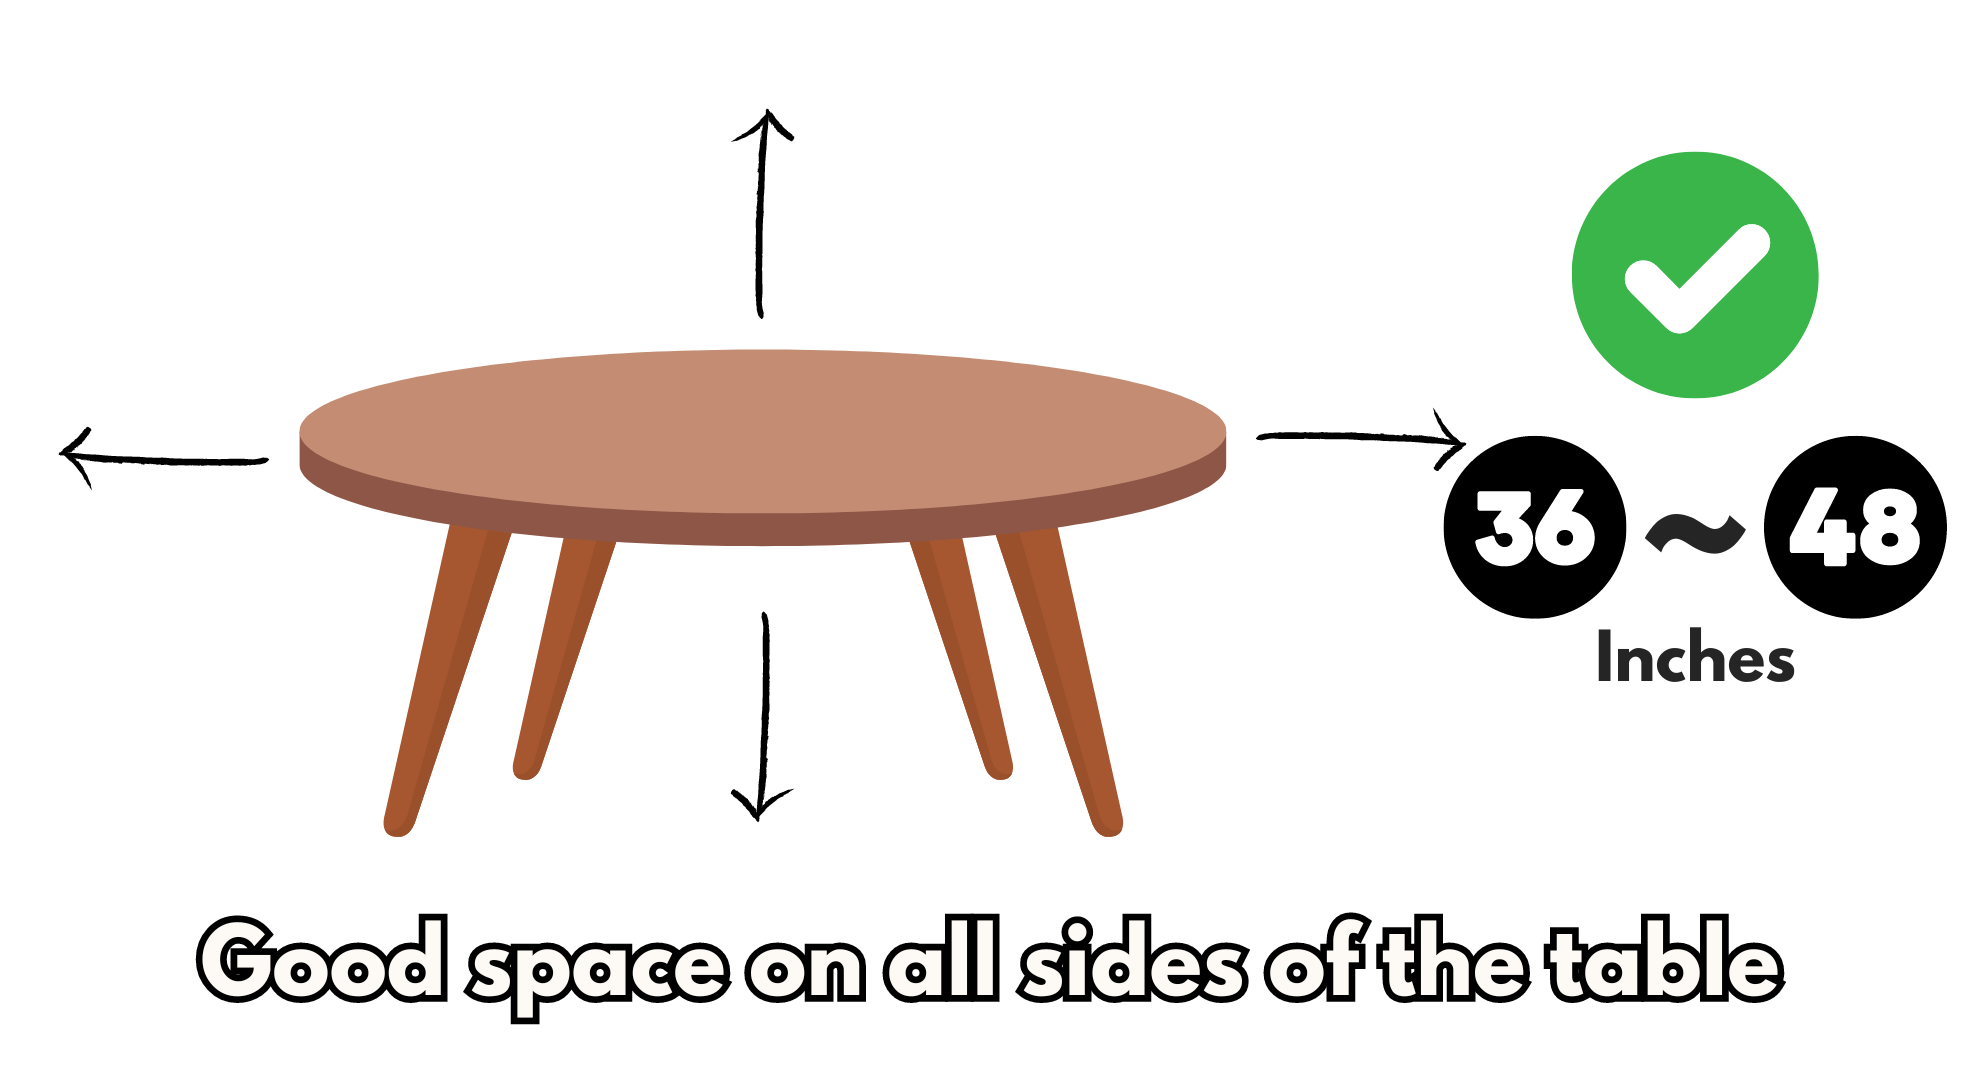 Make sure that there is 36-48 inches of space on all sides of the table